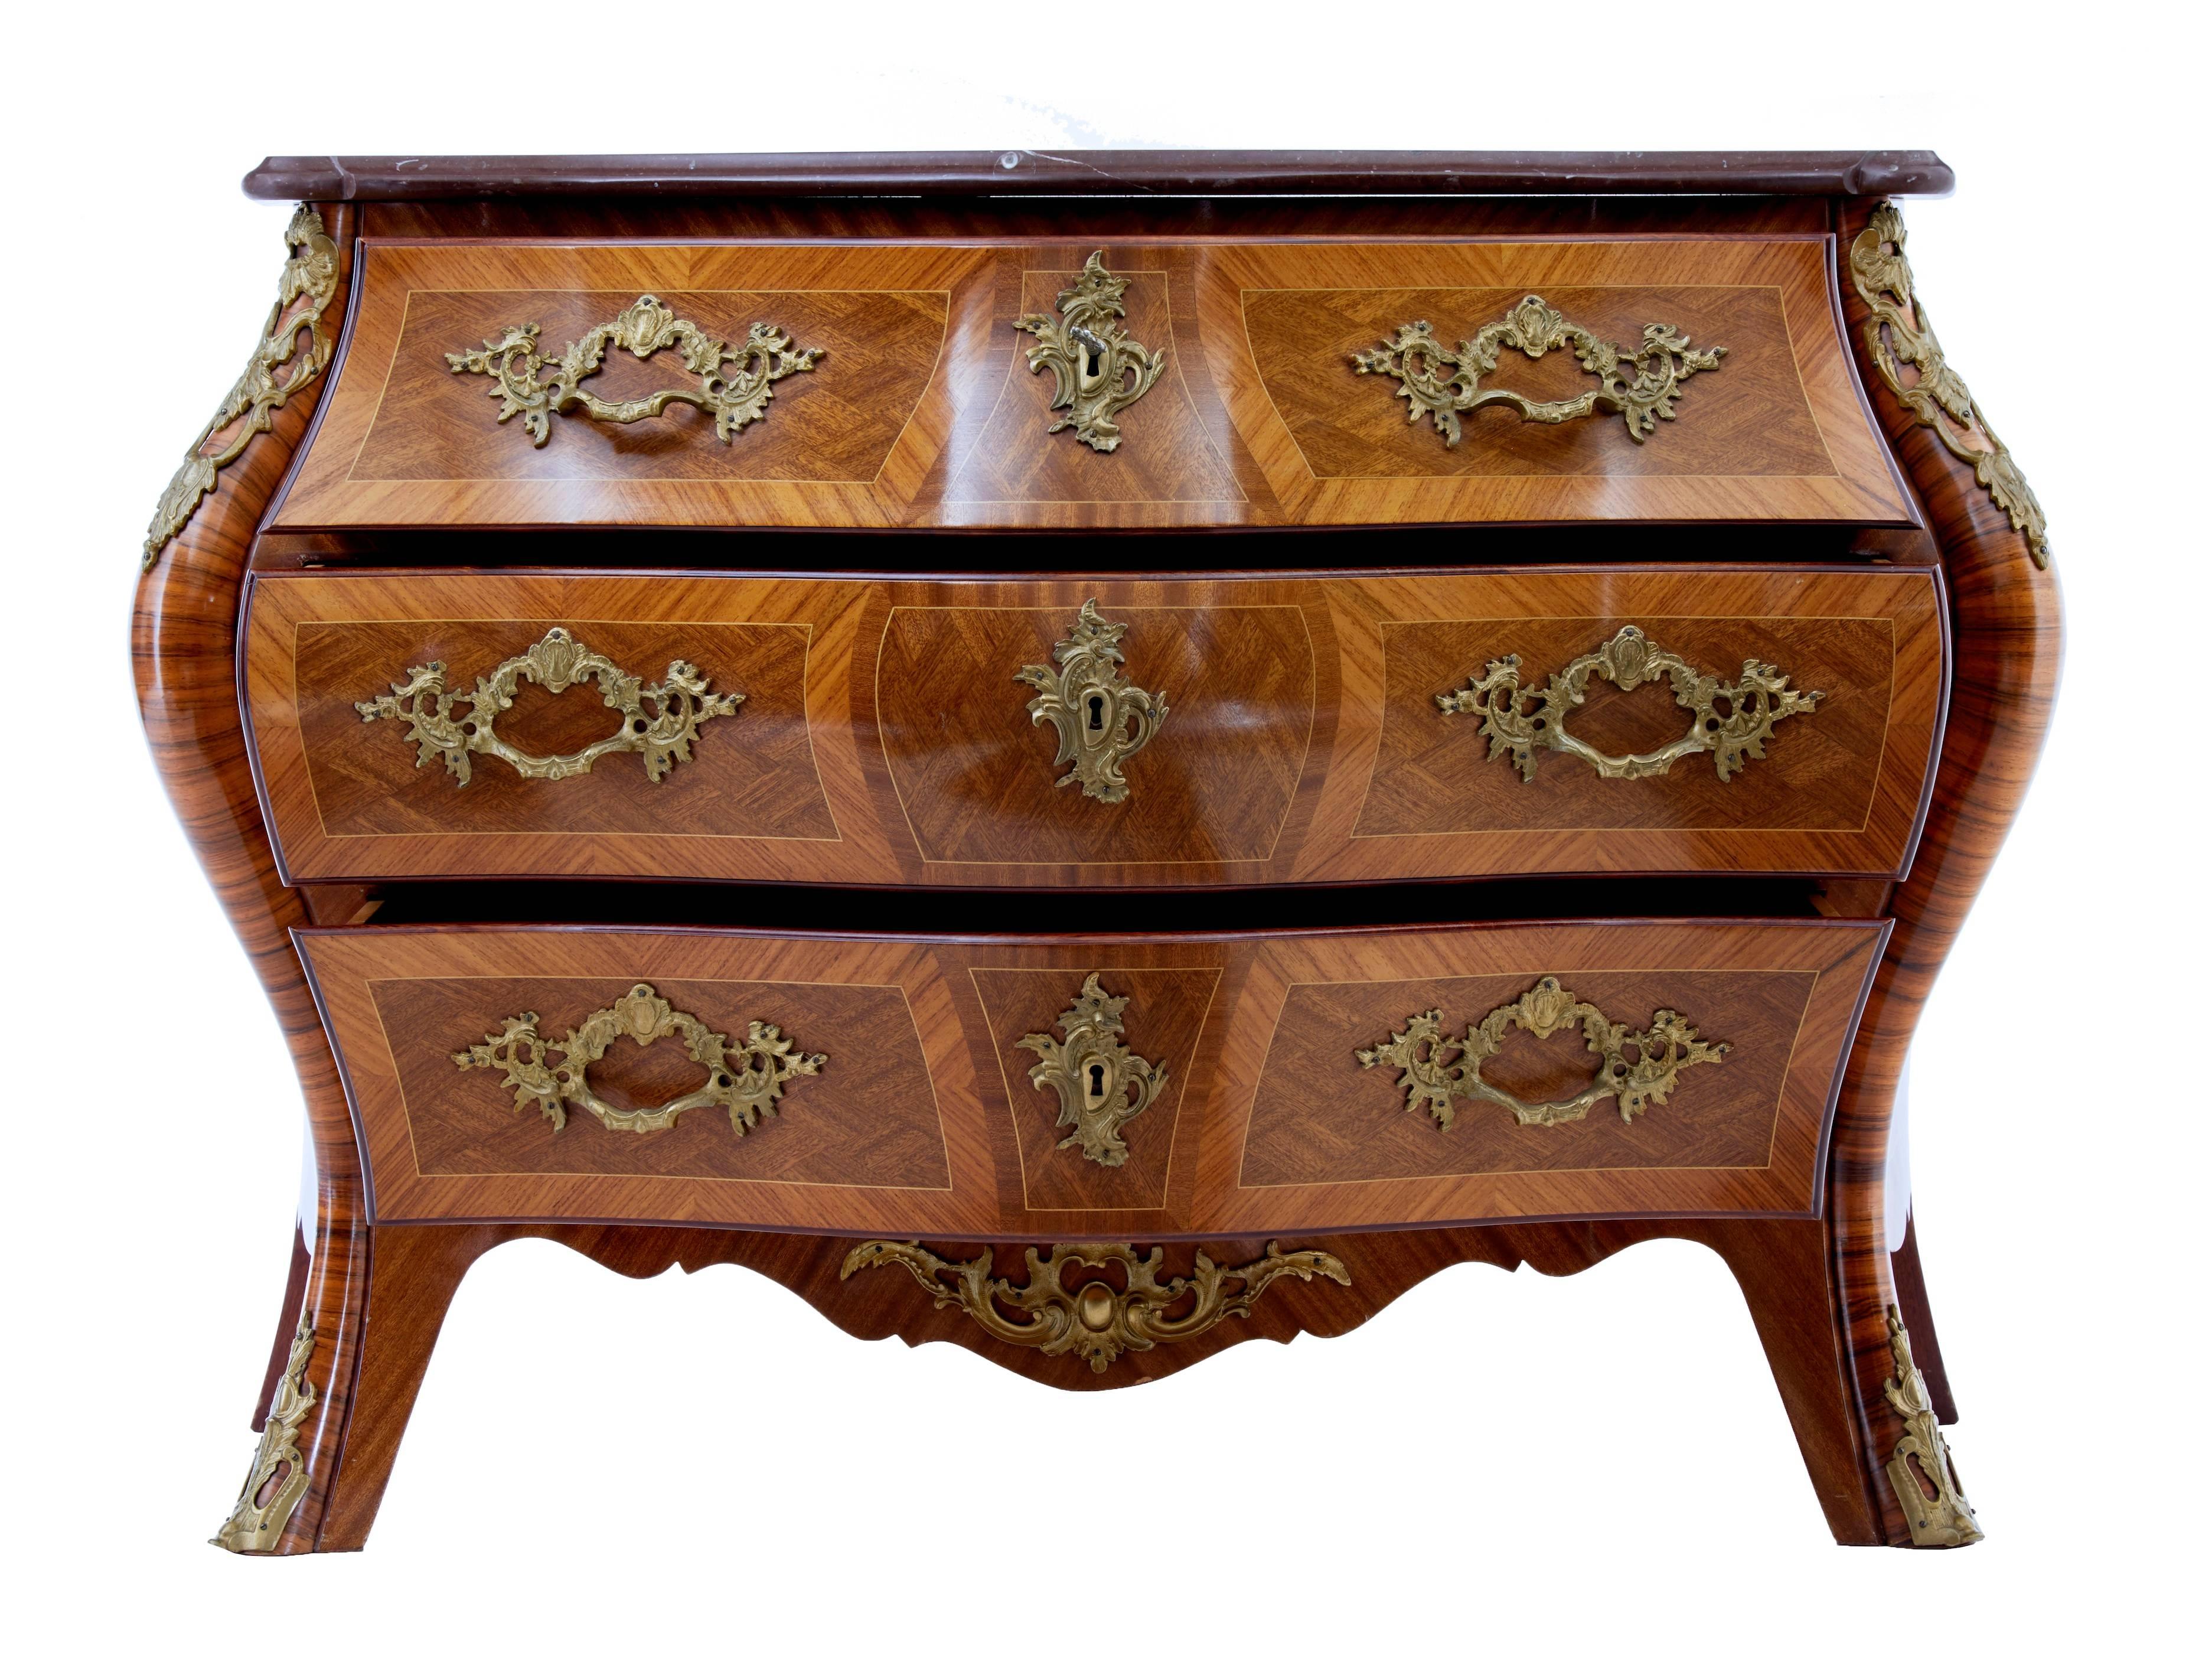 Excellent quality commode by A.B Rococo Mobler.
Beautifully bombe shaped marble top commode. Veneered using mahogany, walnut, satinwood and kingwood.
Decorated with rocaille and leaf shaped ormolu mounts.
Three drawers. Very elegant